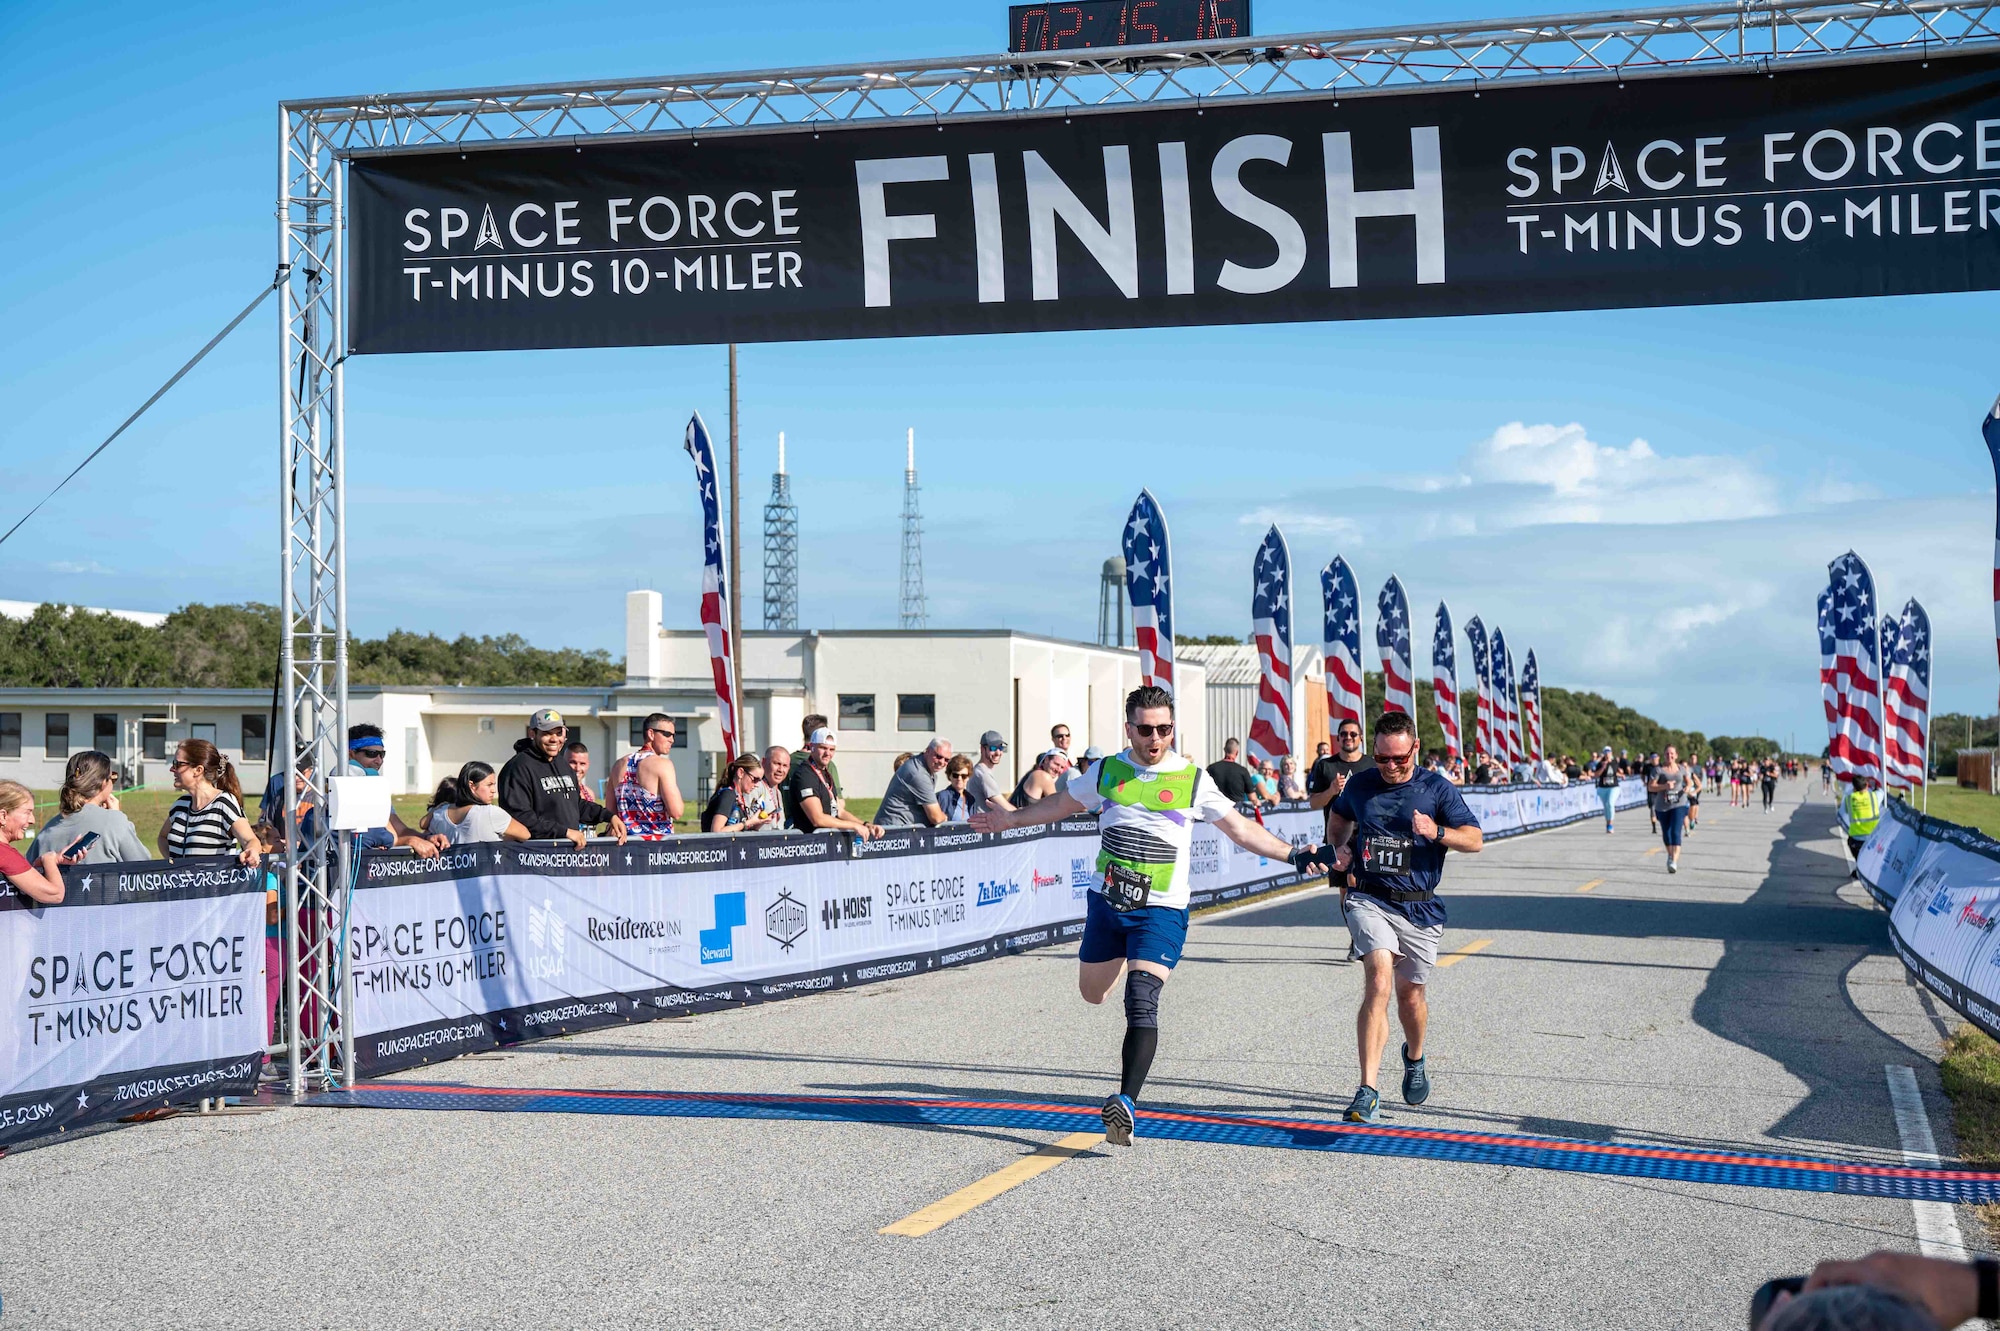 T-Minus 10-Miler participants cross the finish line at Cape Canaveral Space Force Station, Florida, Dec. 9, 2023. The T-Minus 10-Miler celebrates the Space Forces birthday. (U.S. Space Force photo by Senior Airman Samuel Becker)